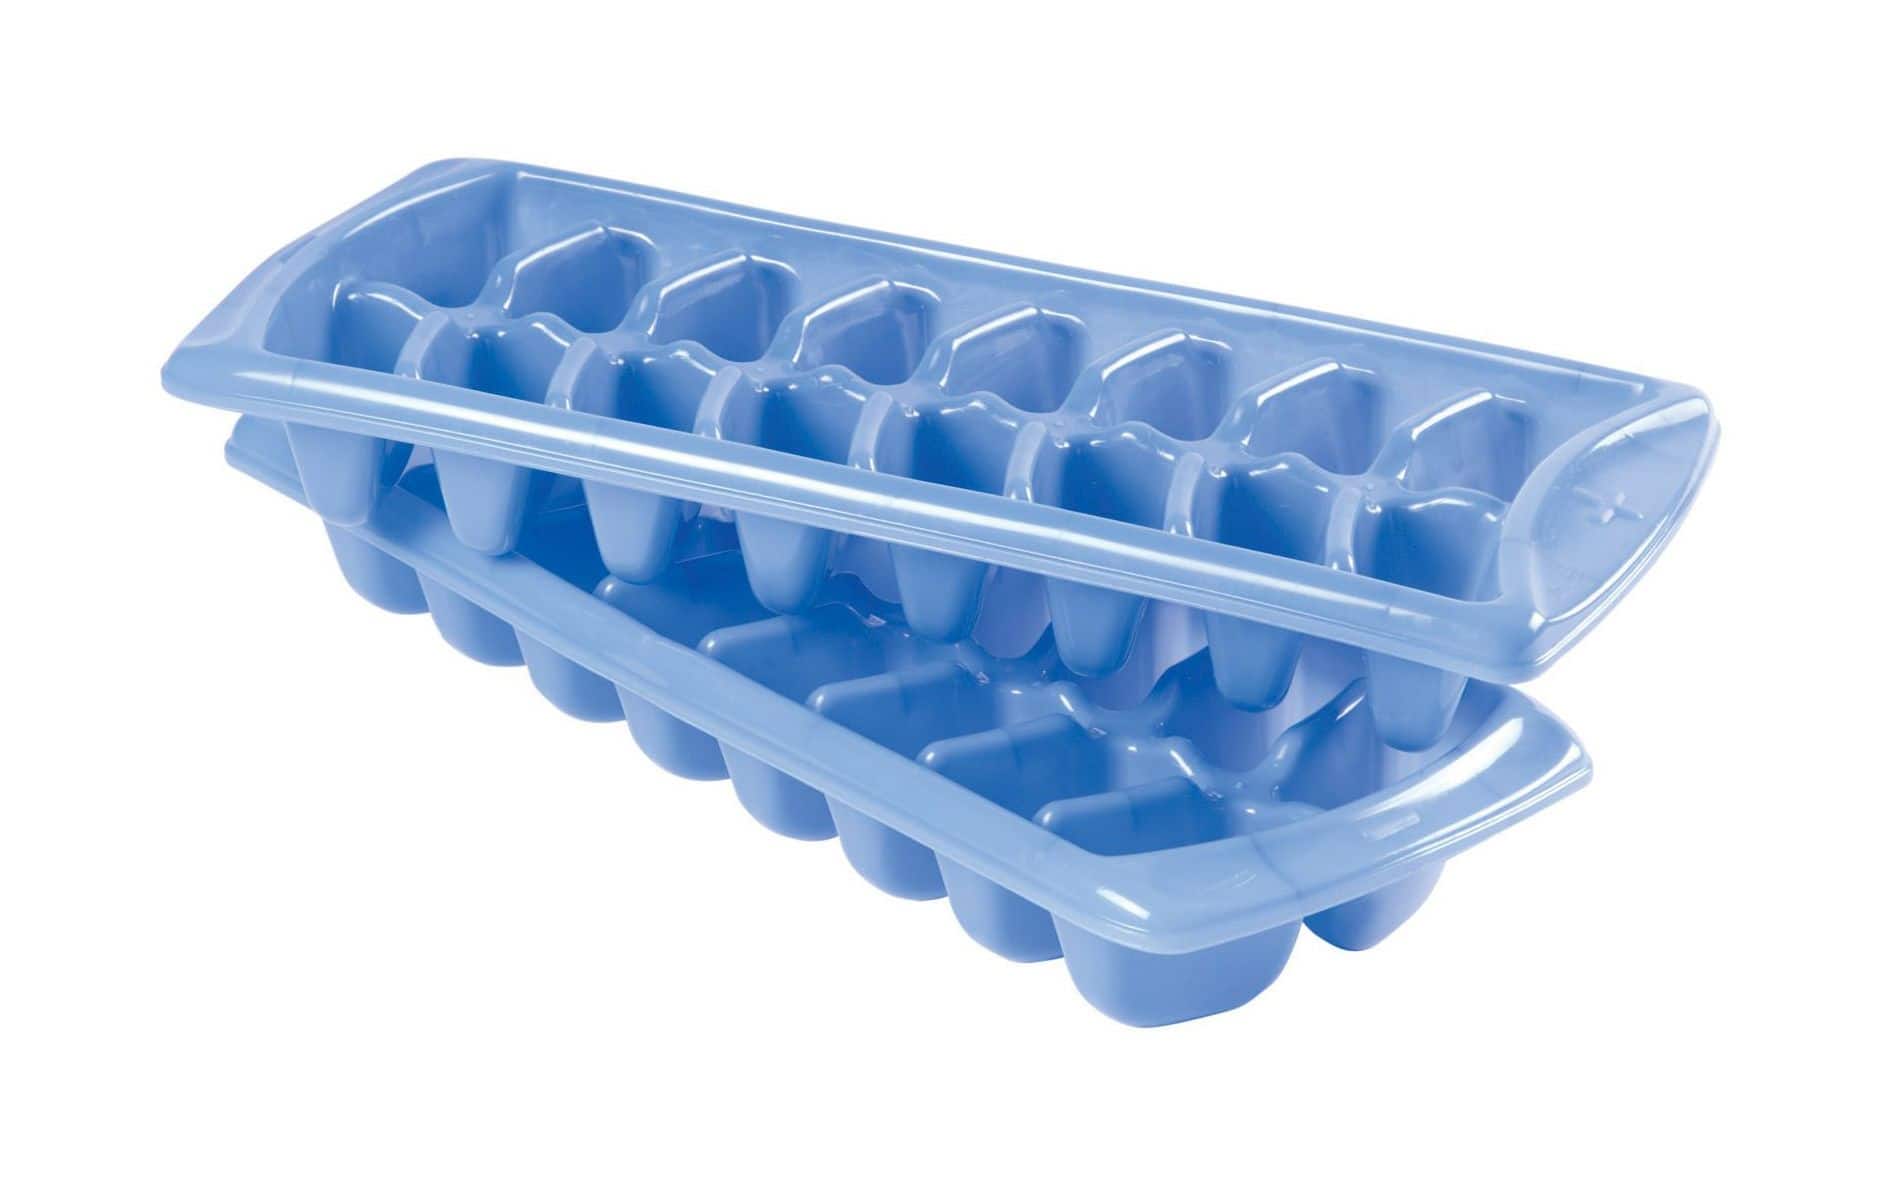 Rubbermaid Ice Cube Tray (3 Pack, White)